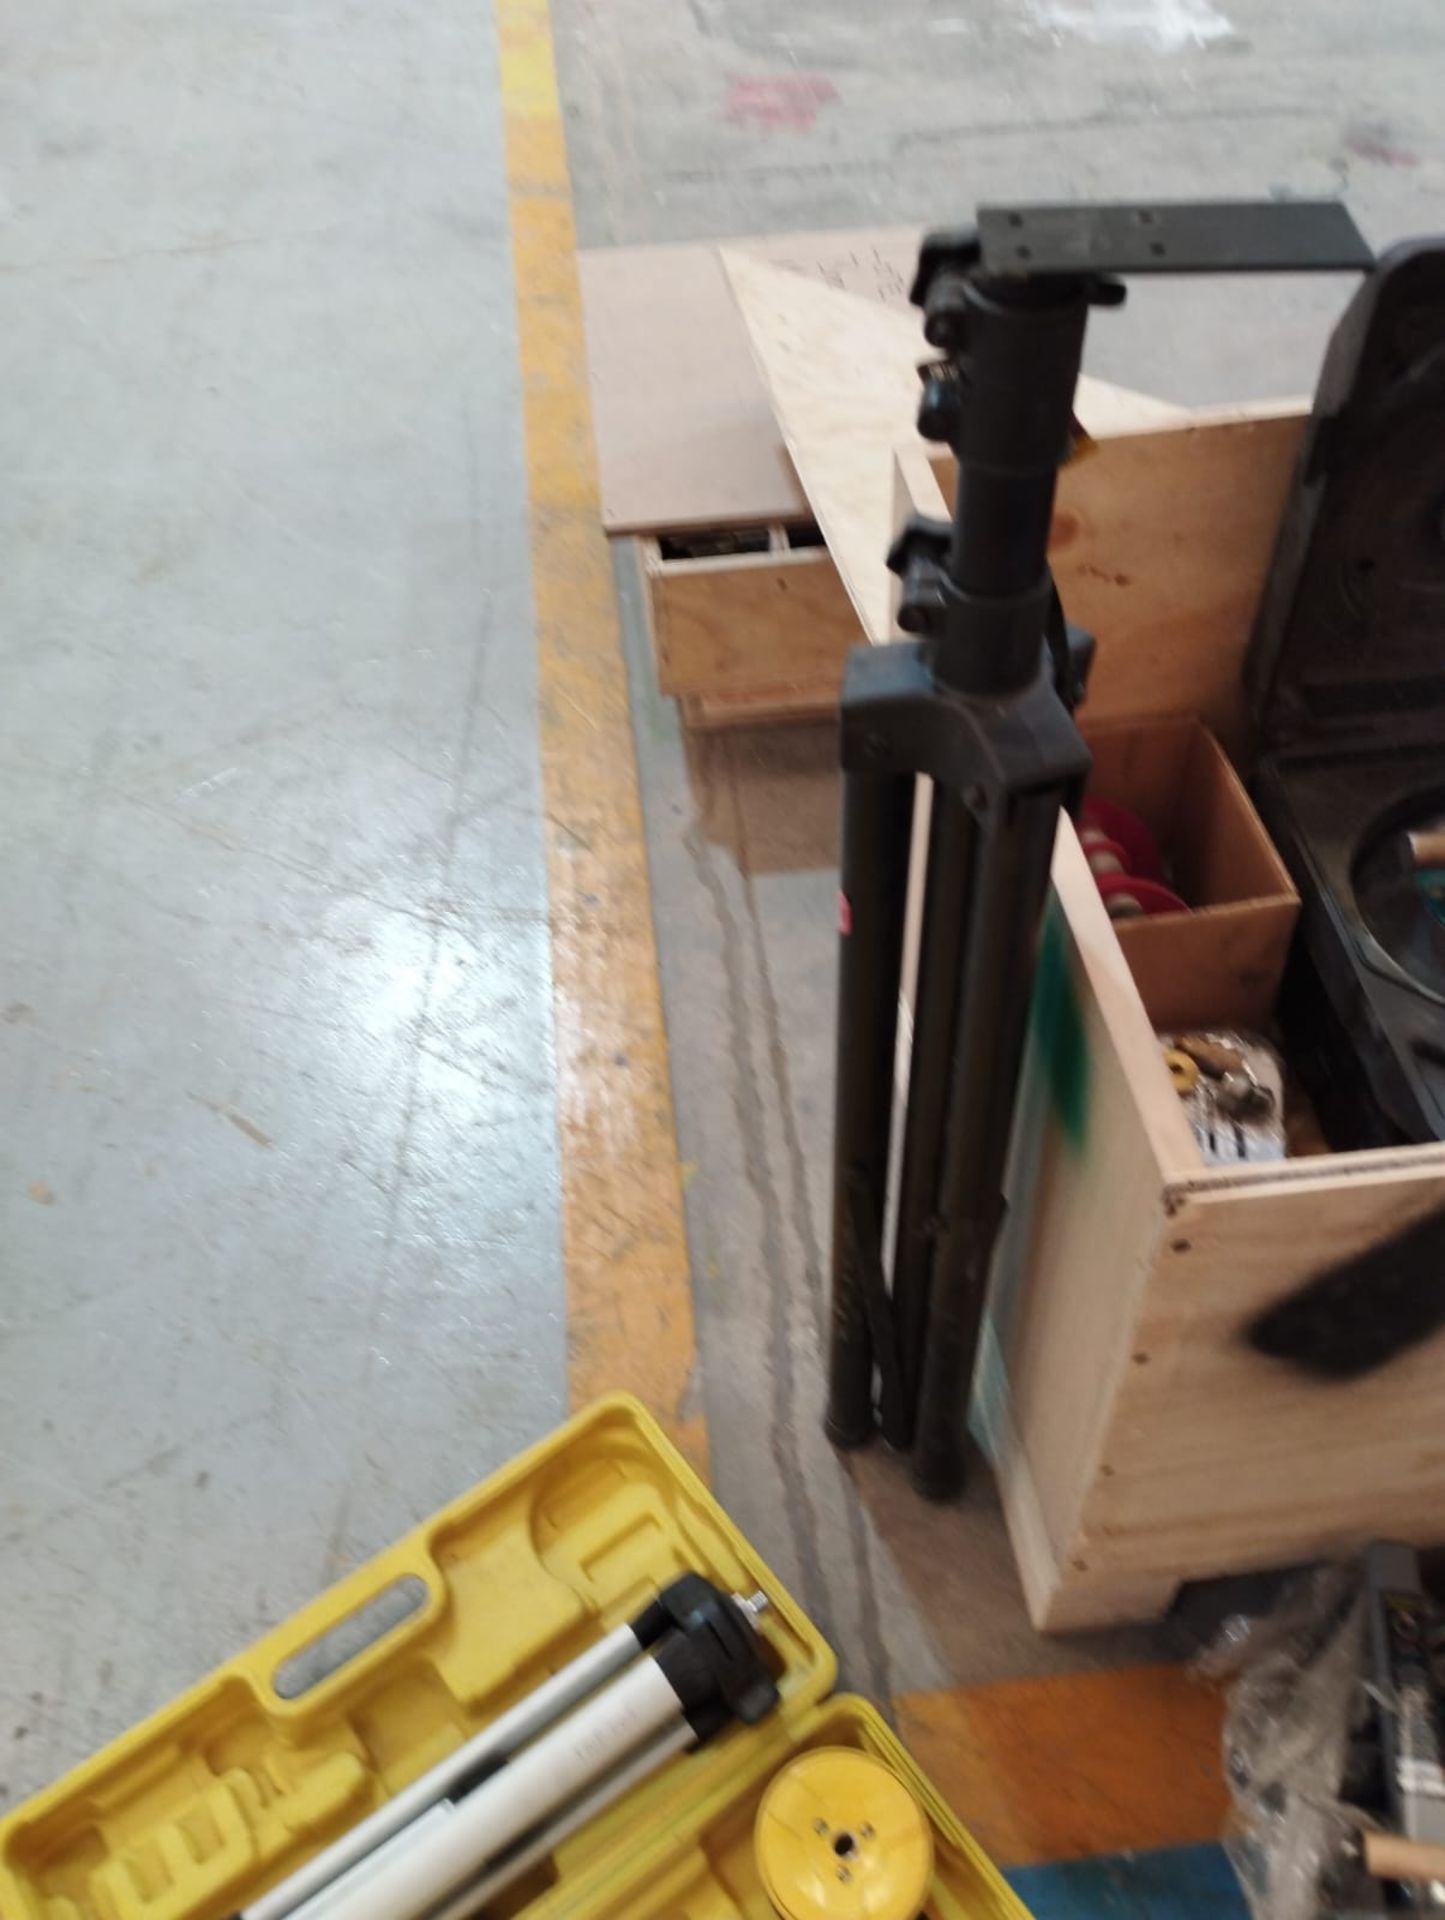 LOT OF EQUIPMENT FOR PAINTING, PORTABLE DRILLS, GRAPPLES AND MISCELLANEOUS TOOLS - Image 2 of 17